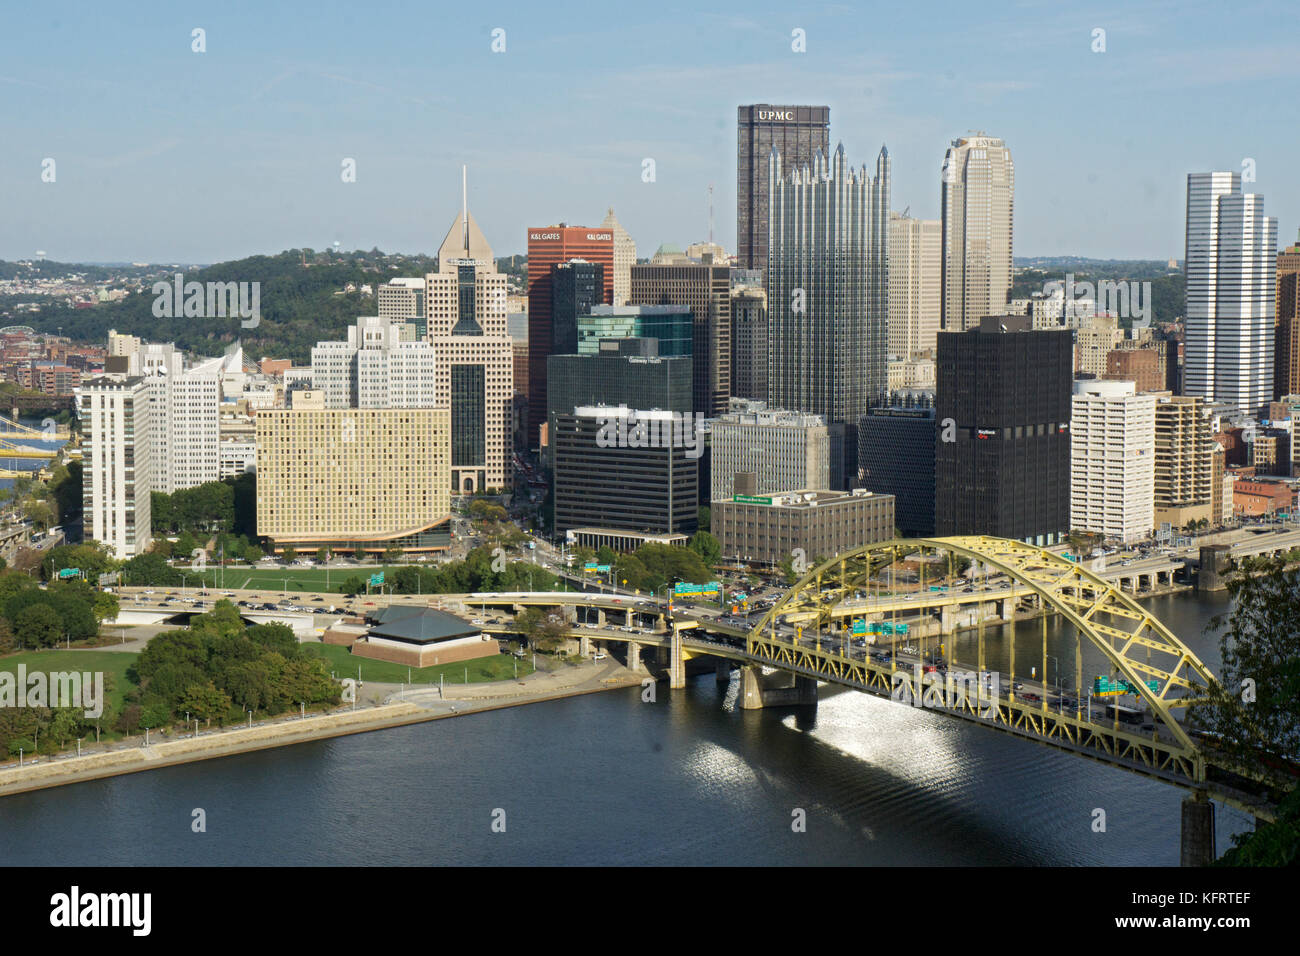 The downtown skyline of Pittsburgh, Pennsylvania as seen from Mount Washington on the city's South Side. Stock Photo